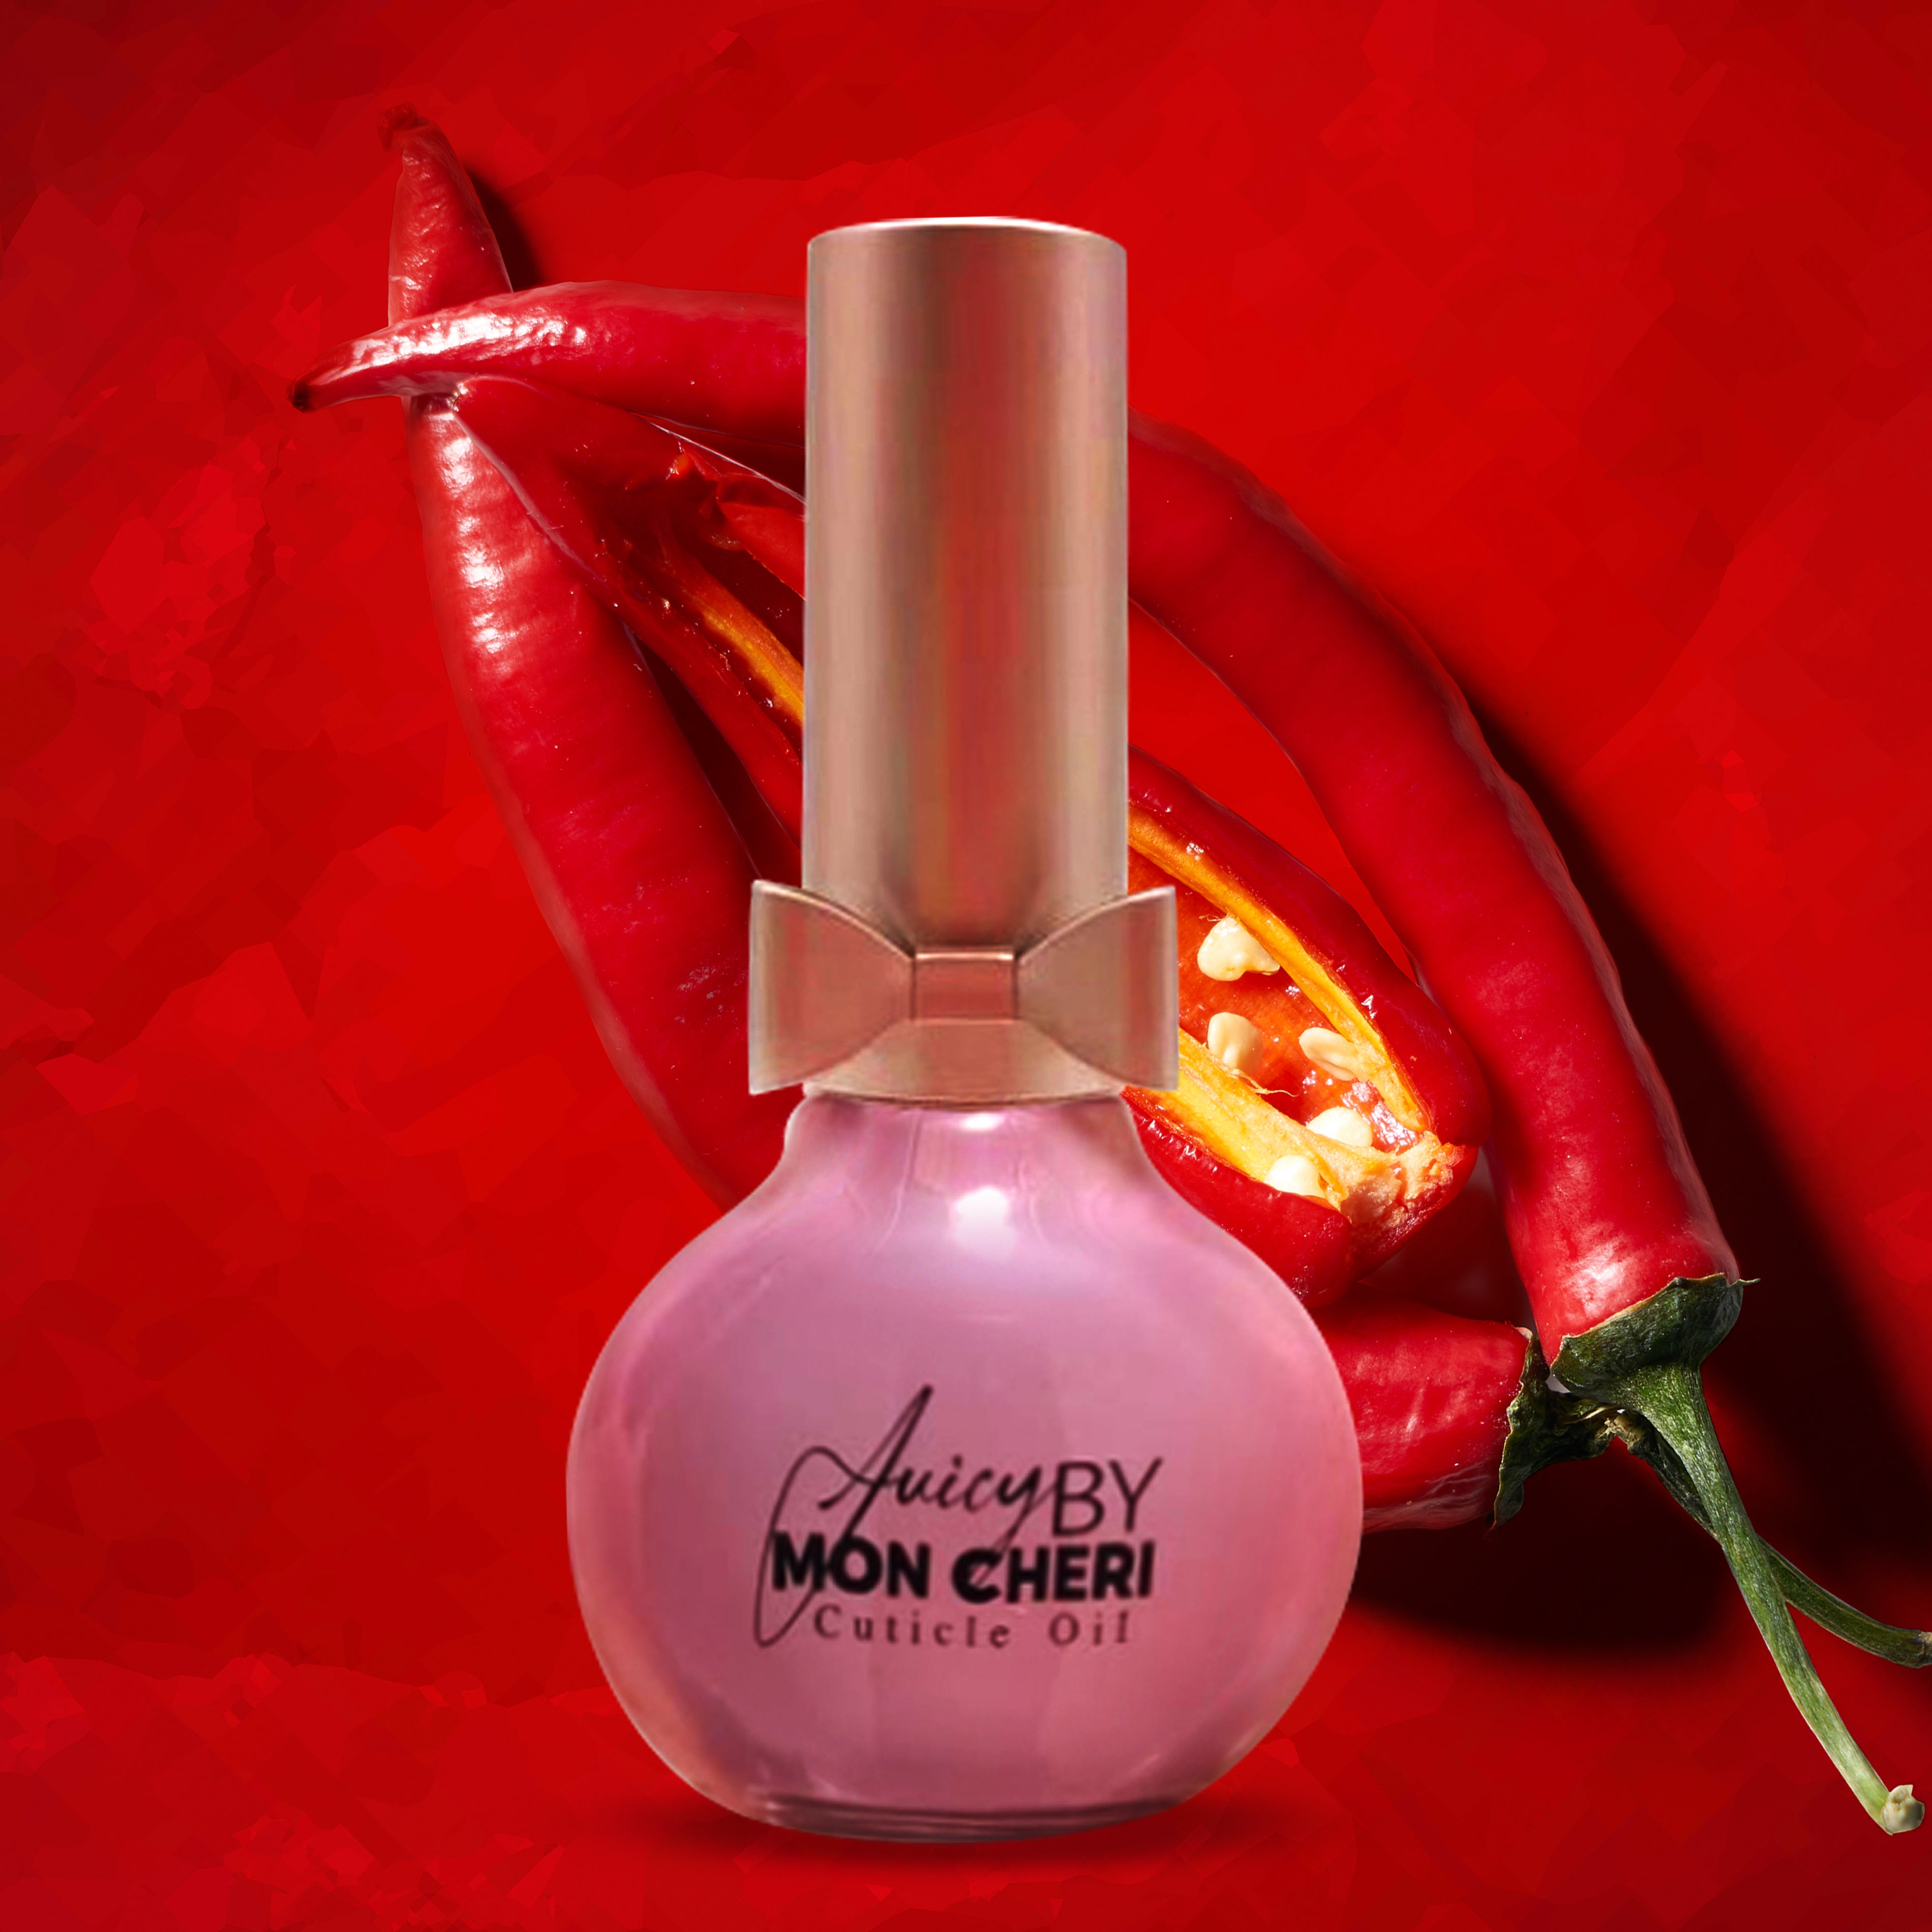 Red Hot Cinnamon Scented Cuticle Oil by Juicy by Mon Cheri